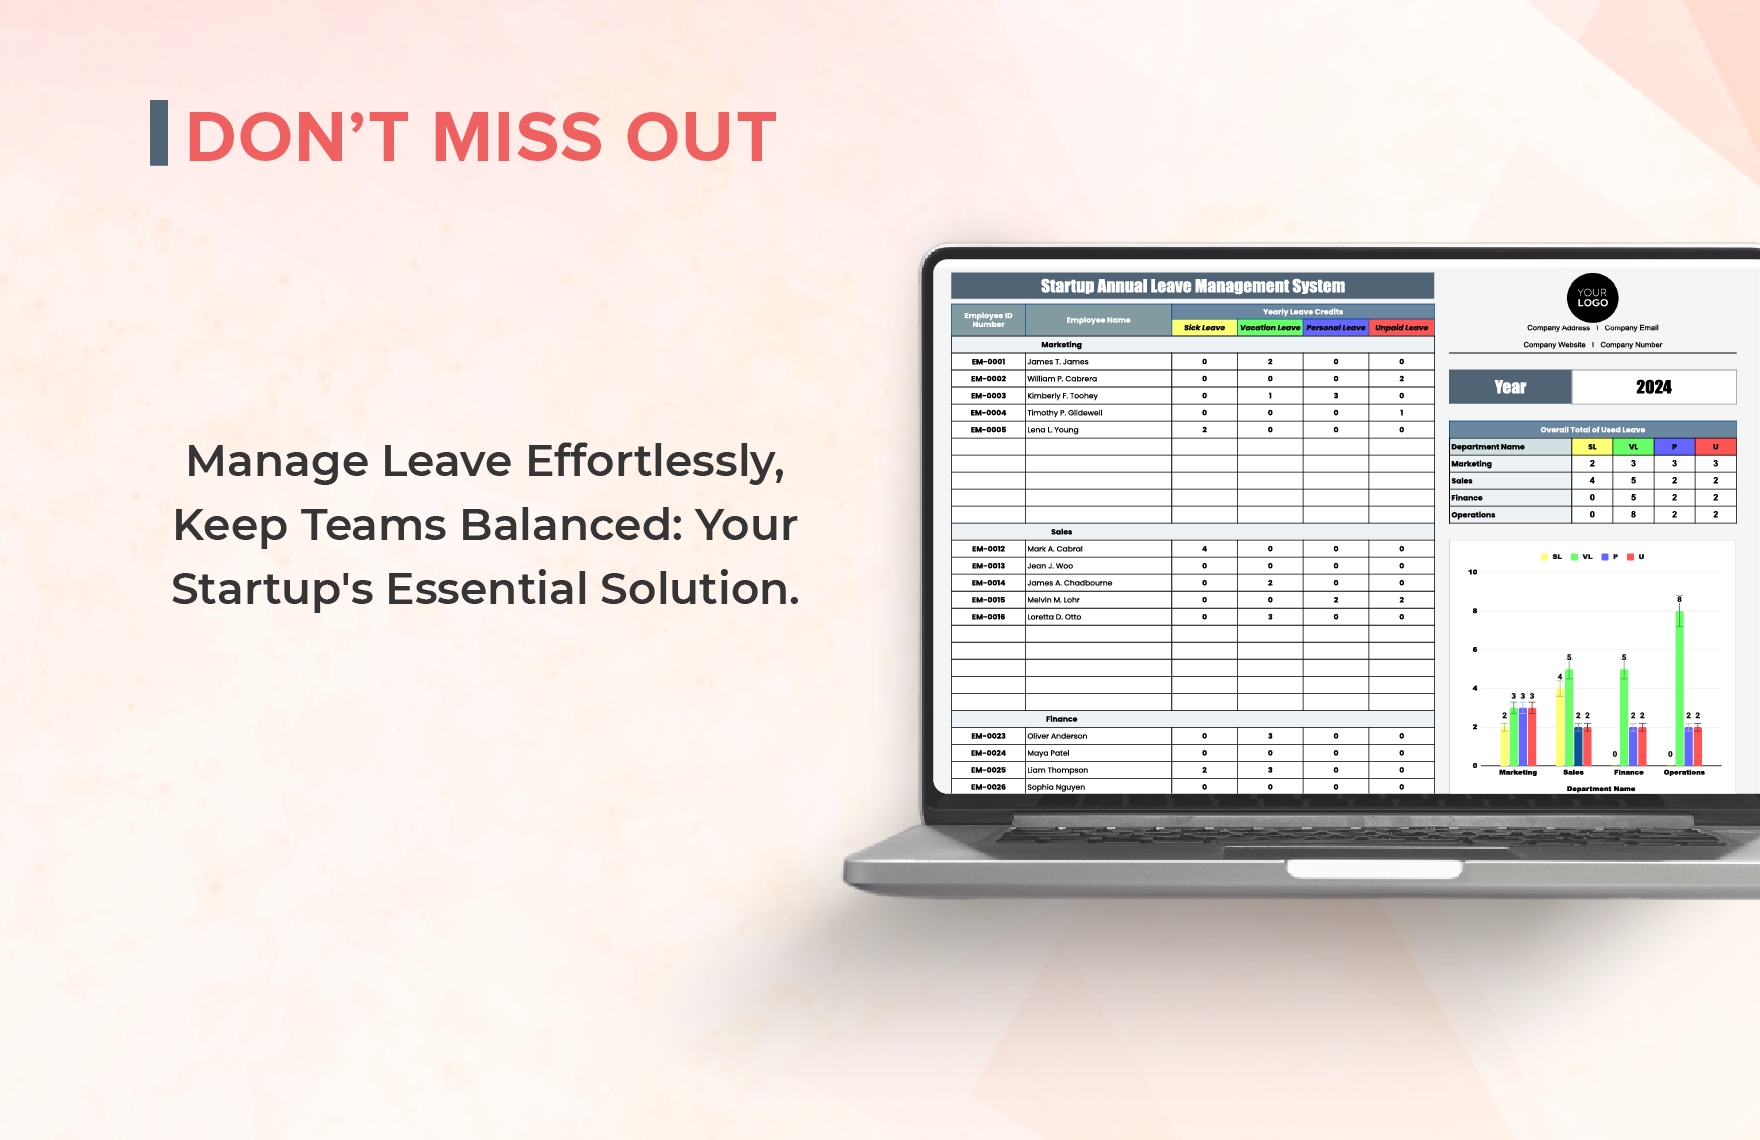 Startup Annual Leave Management System Template